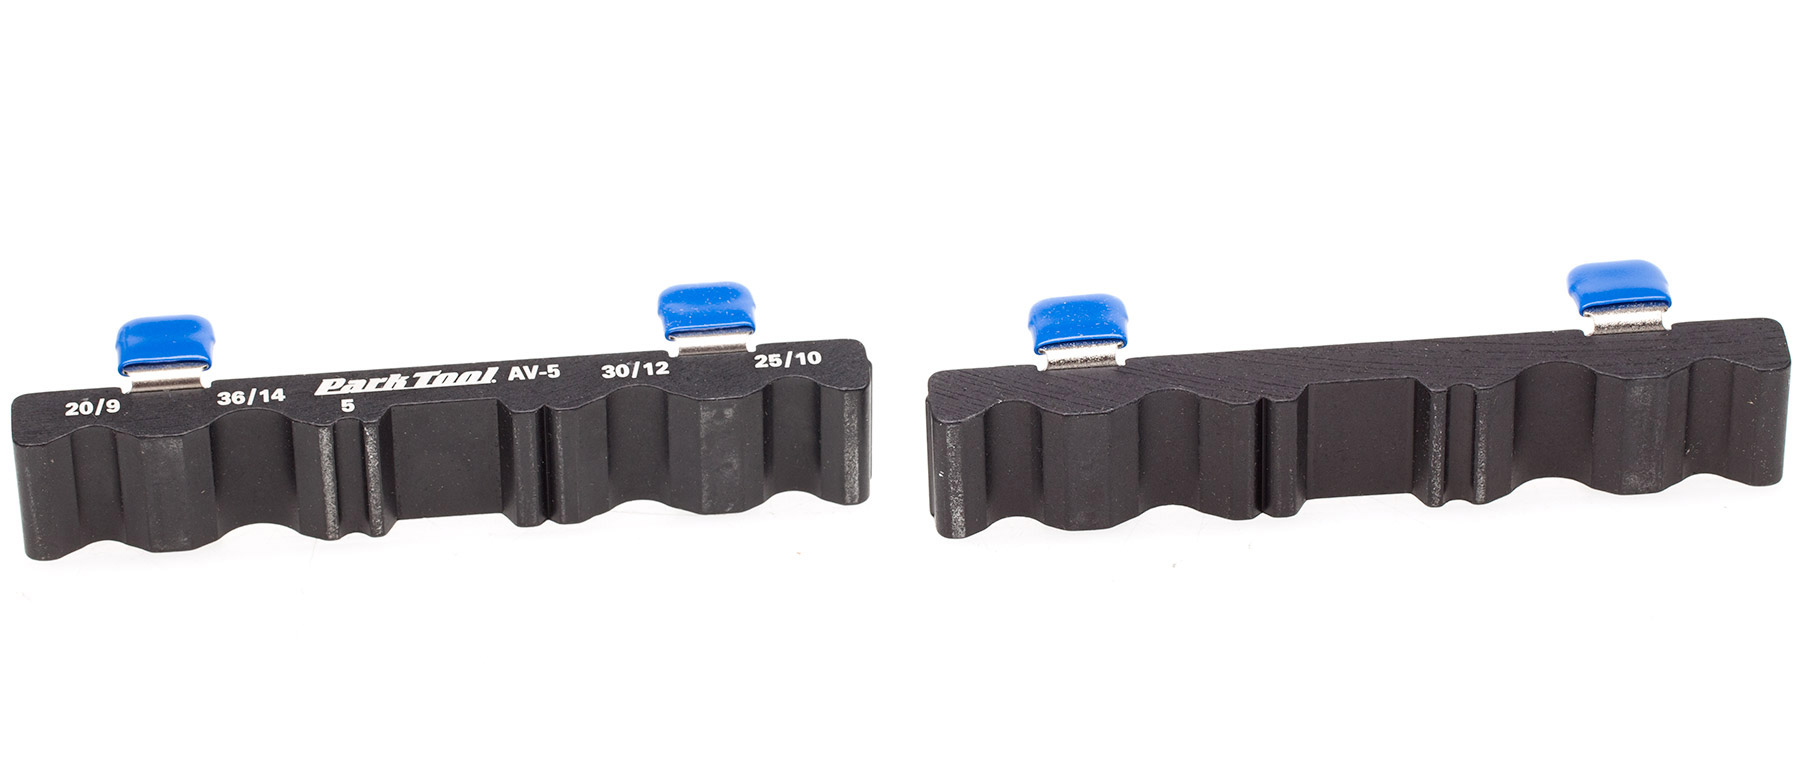 Park Tool AV-5 Axle and Spindle Vise Inserts